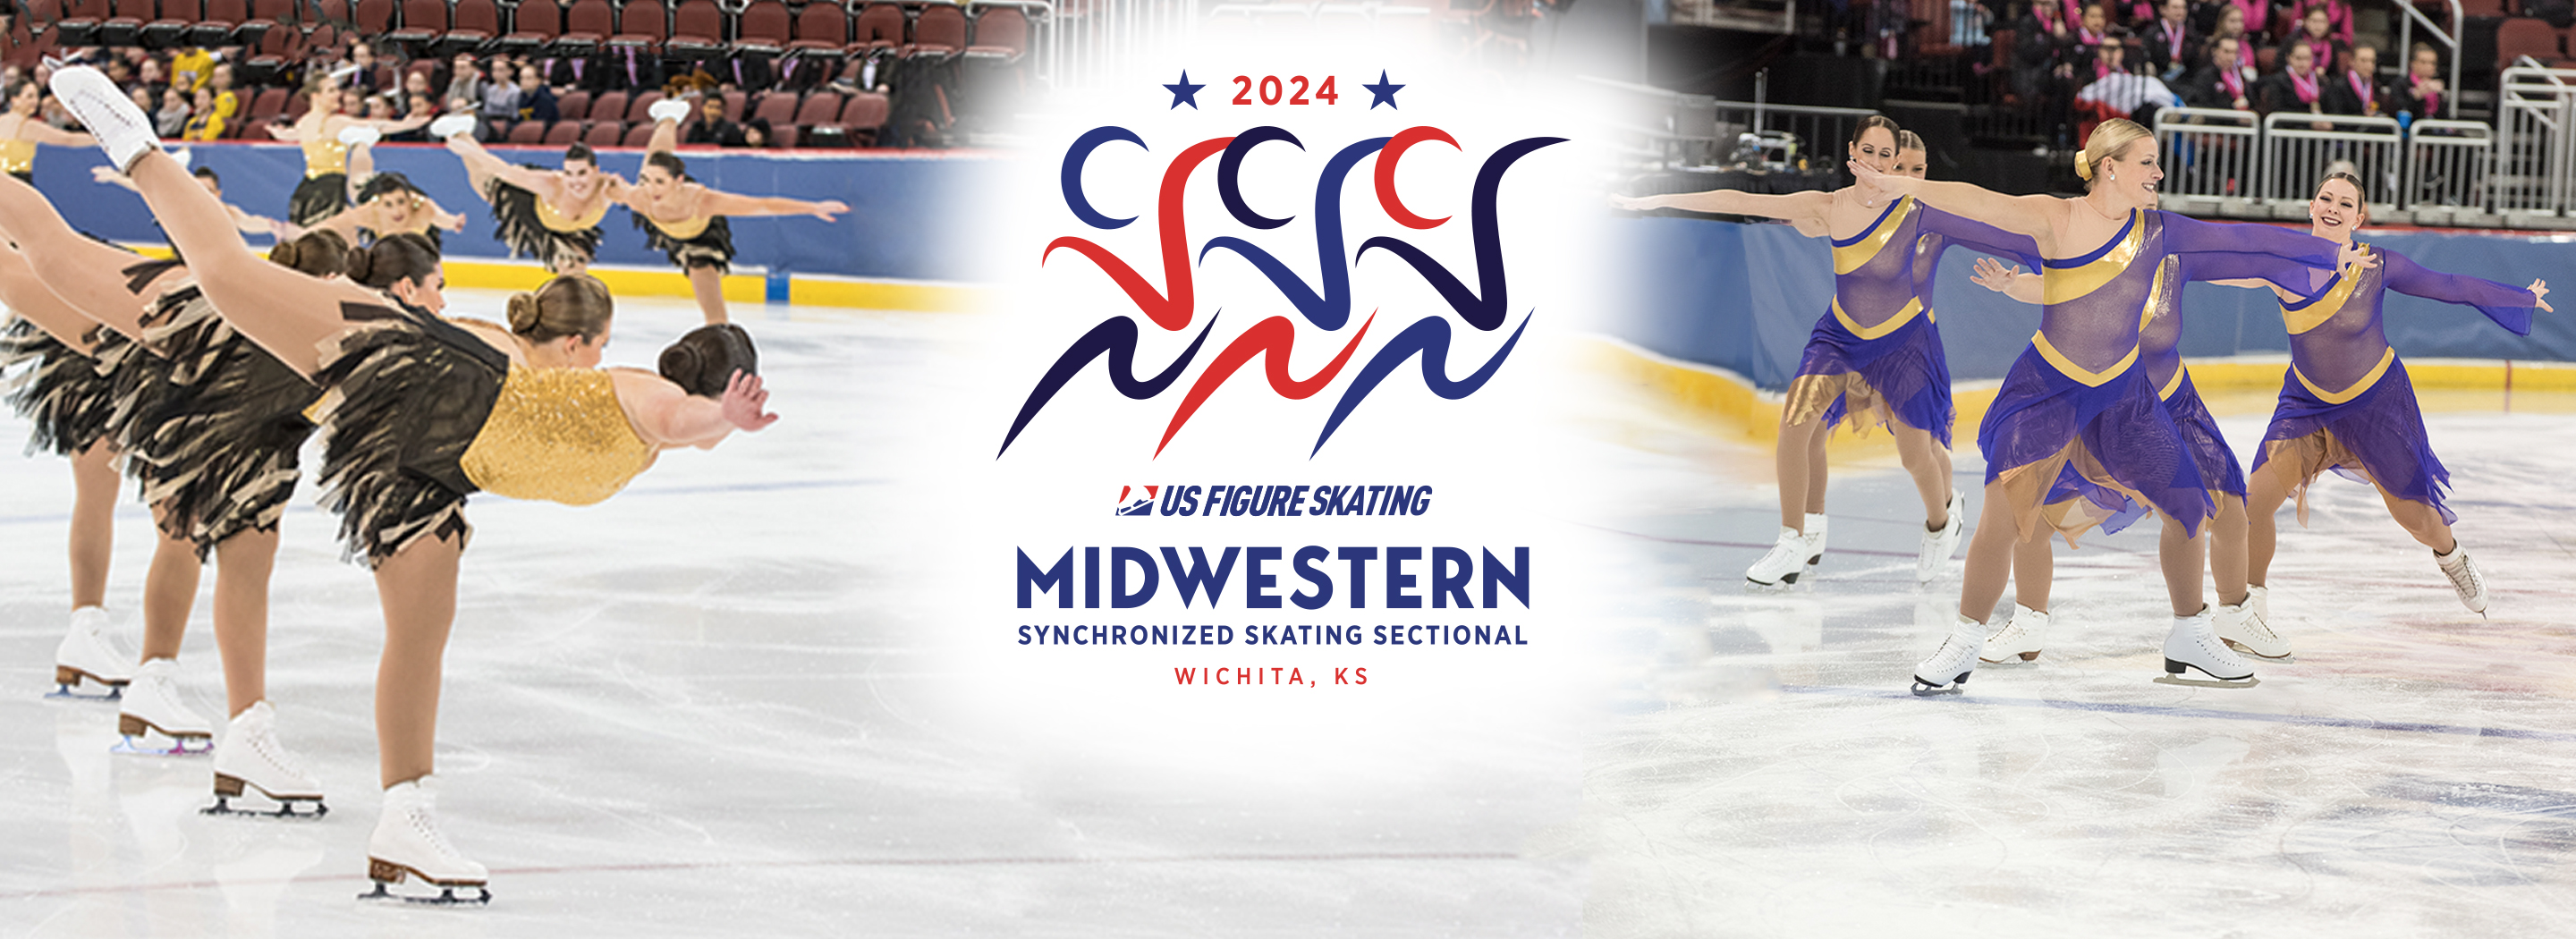 2024 Midwestern Synchronized Skating Sectional Championships INTRUST